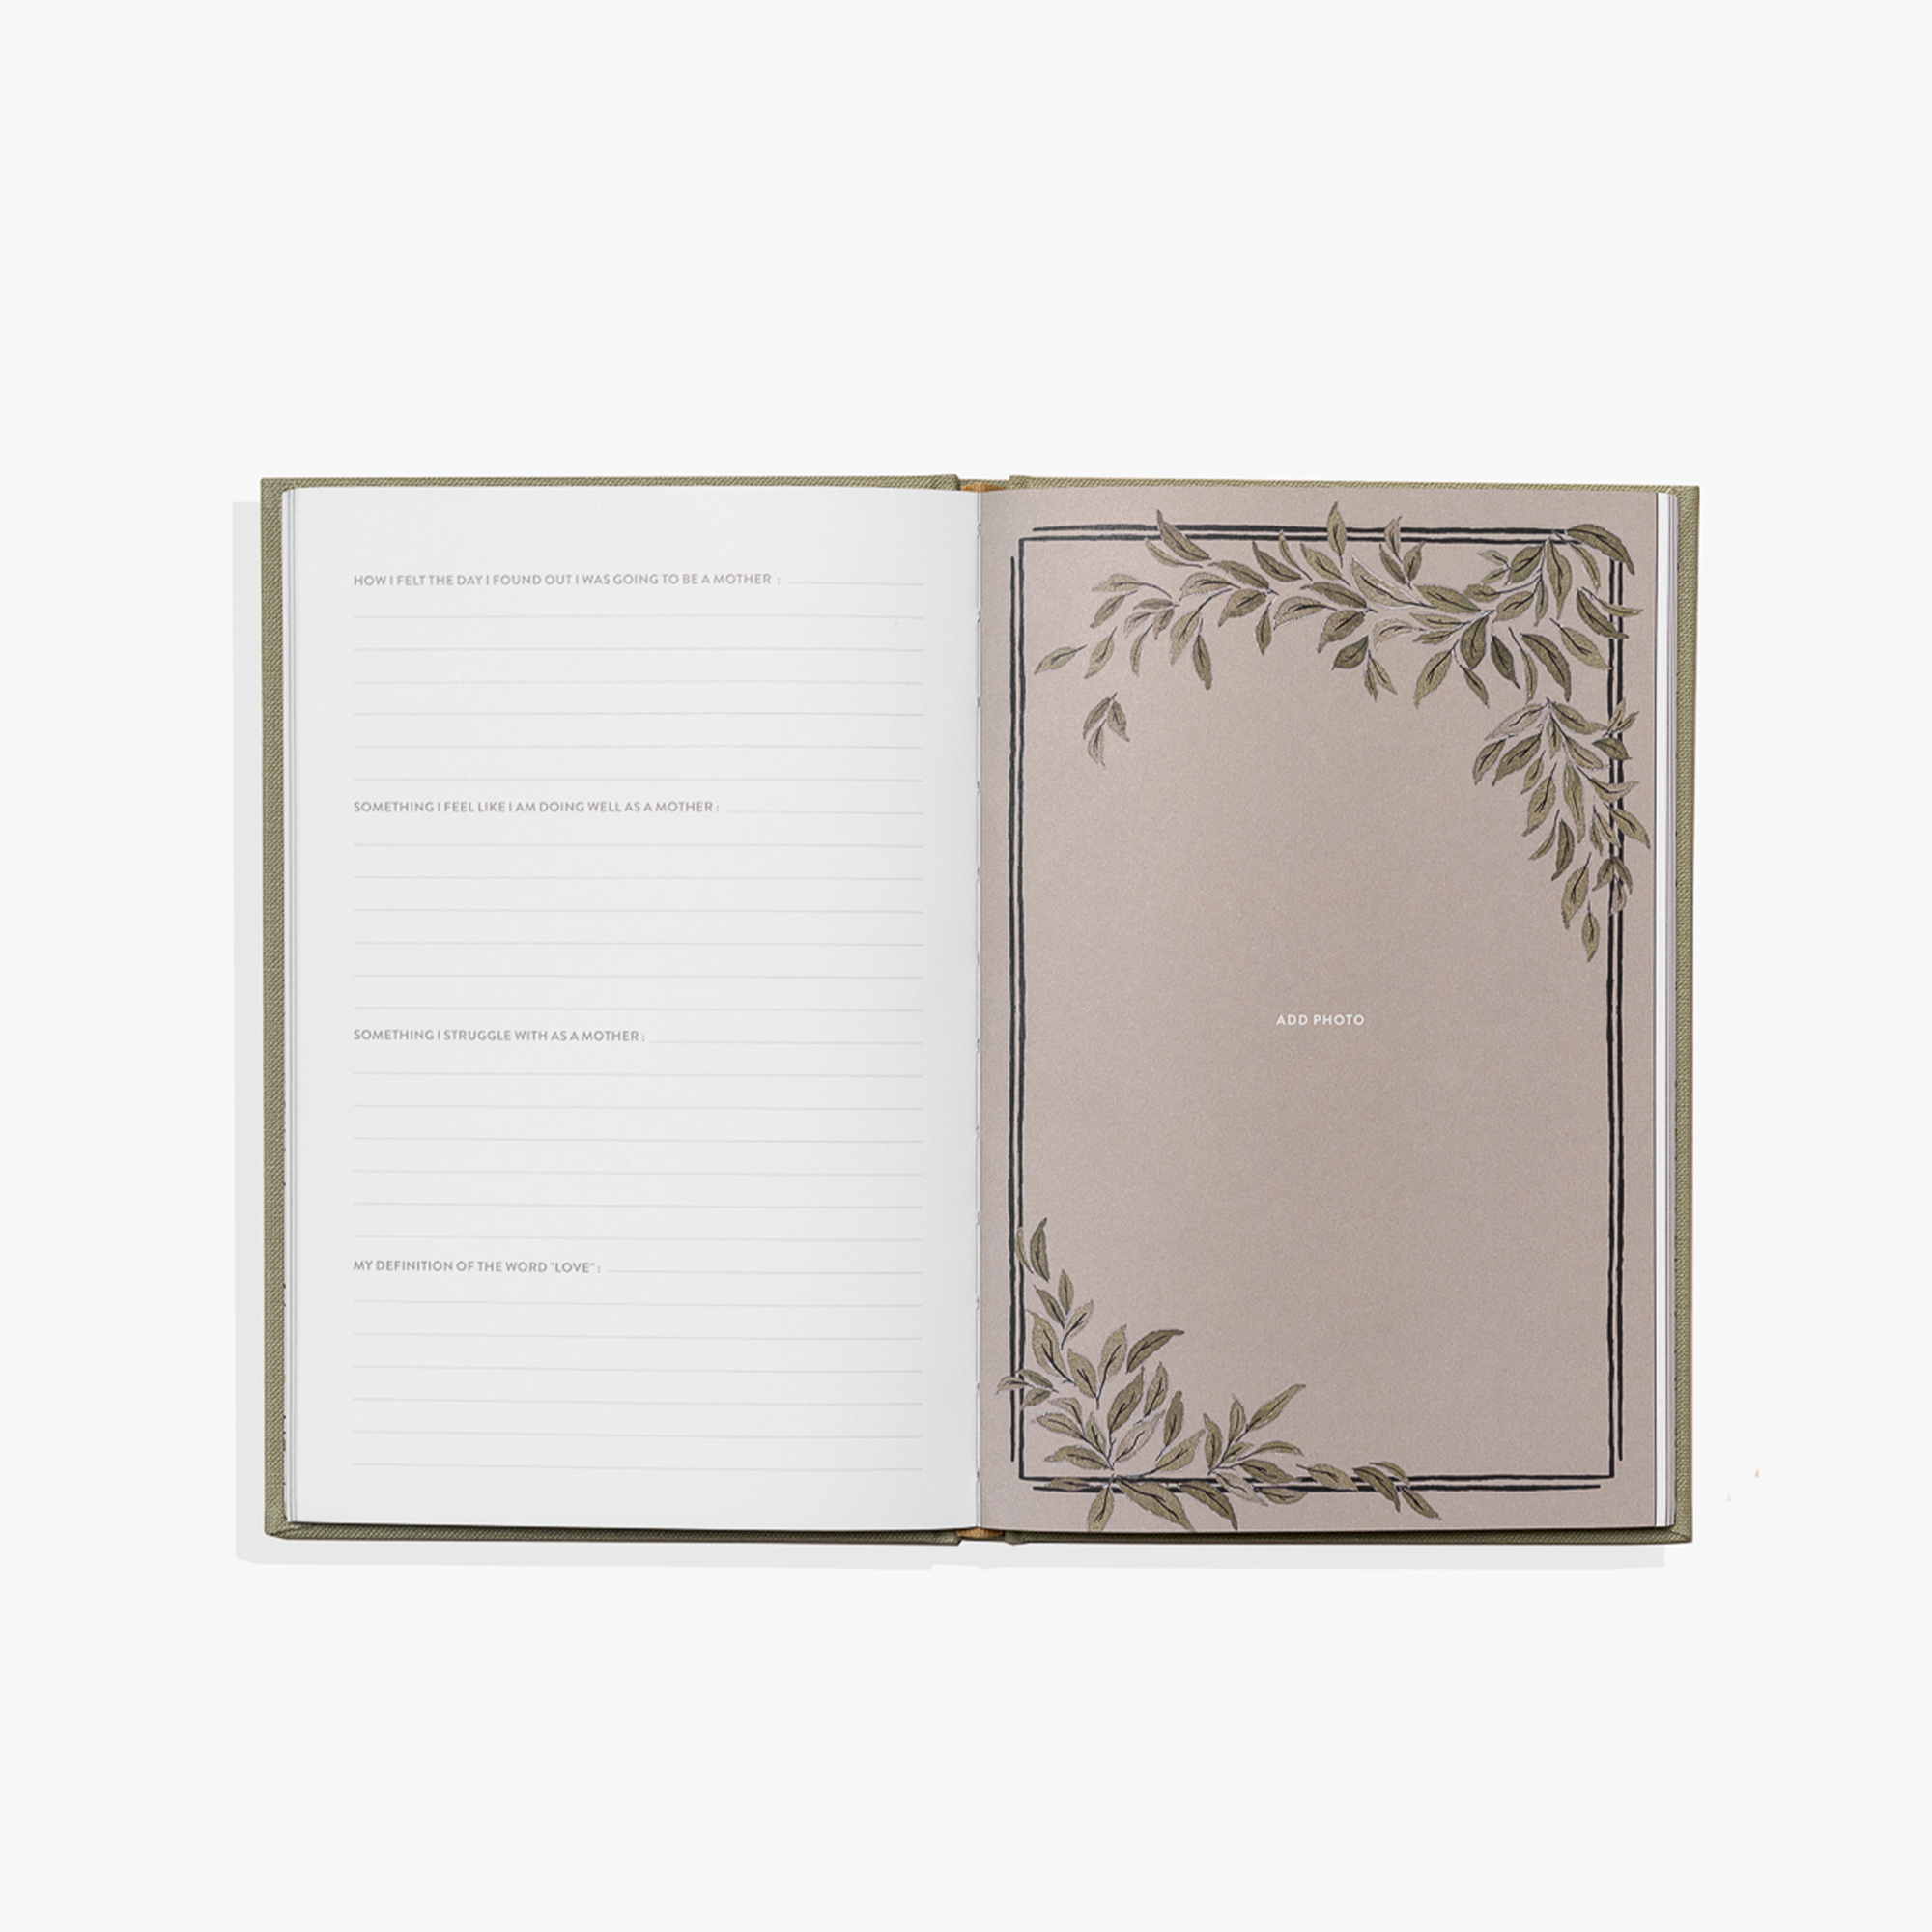 A Mom's Story-inspired memory book or guided journal.